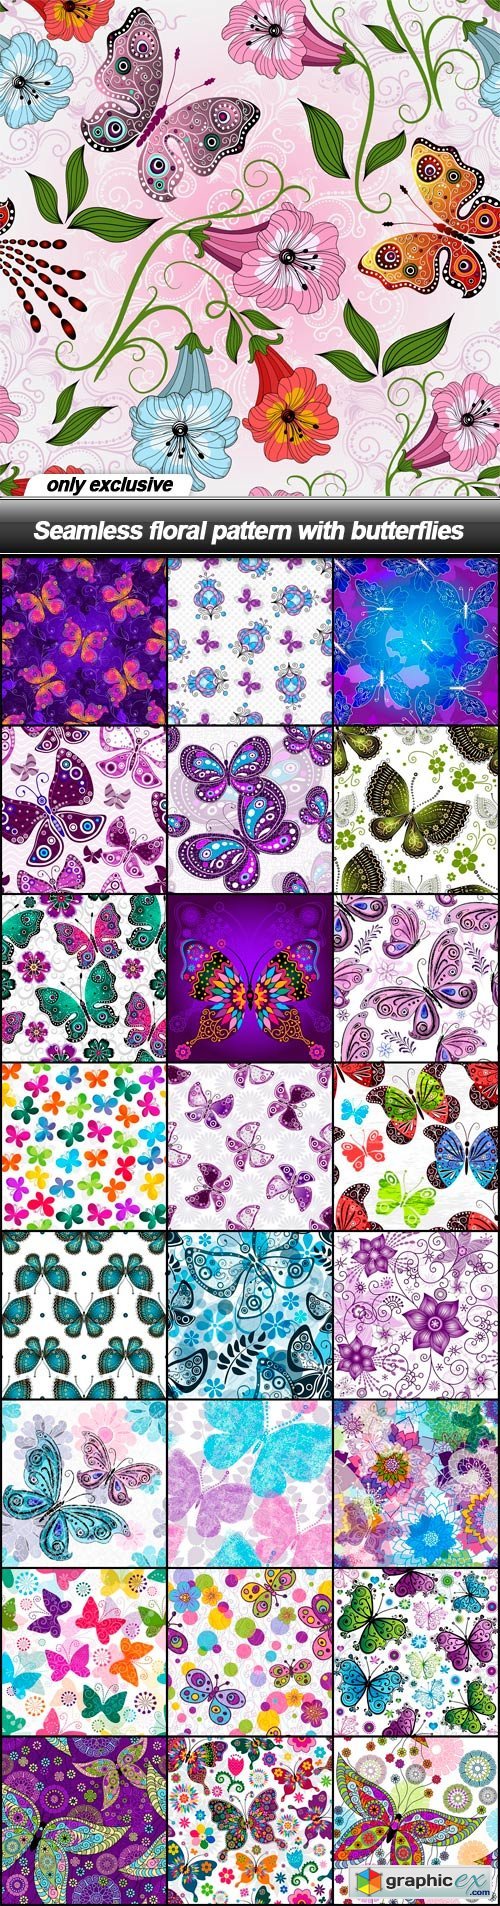 Seamless floral pattern with butterflies - 25 EPS